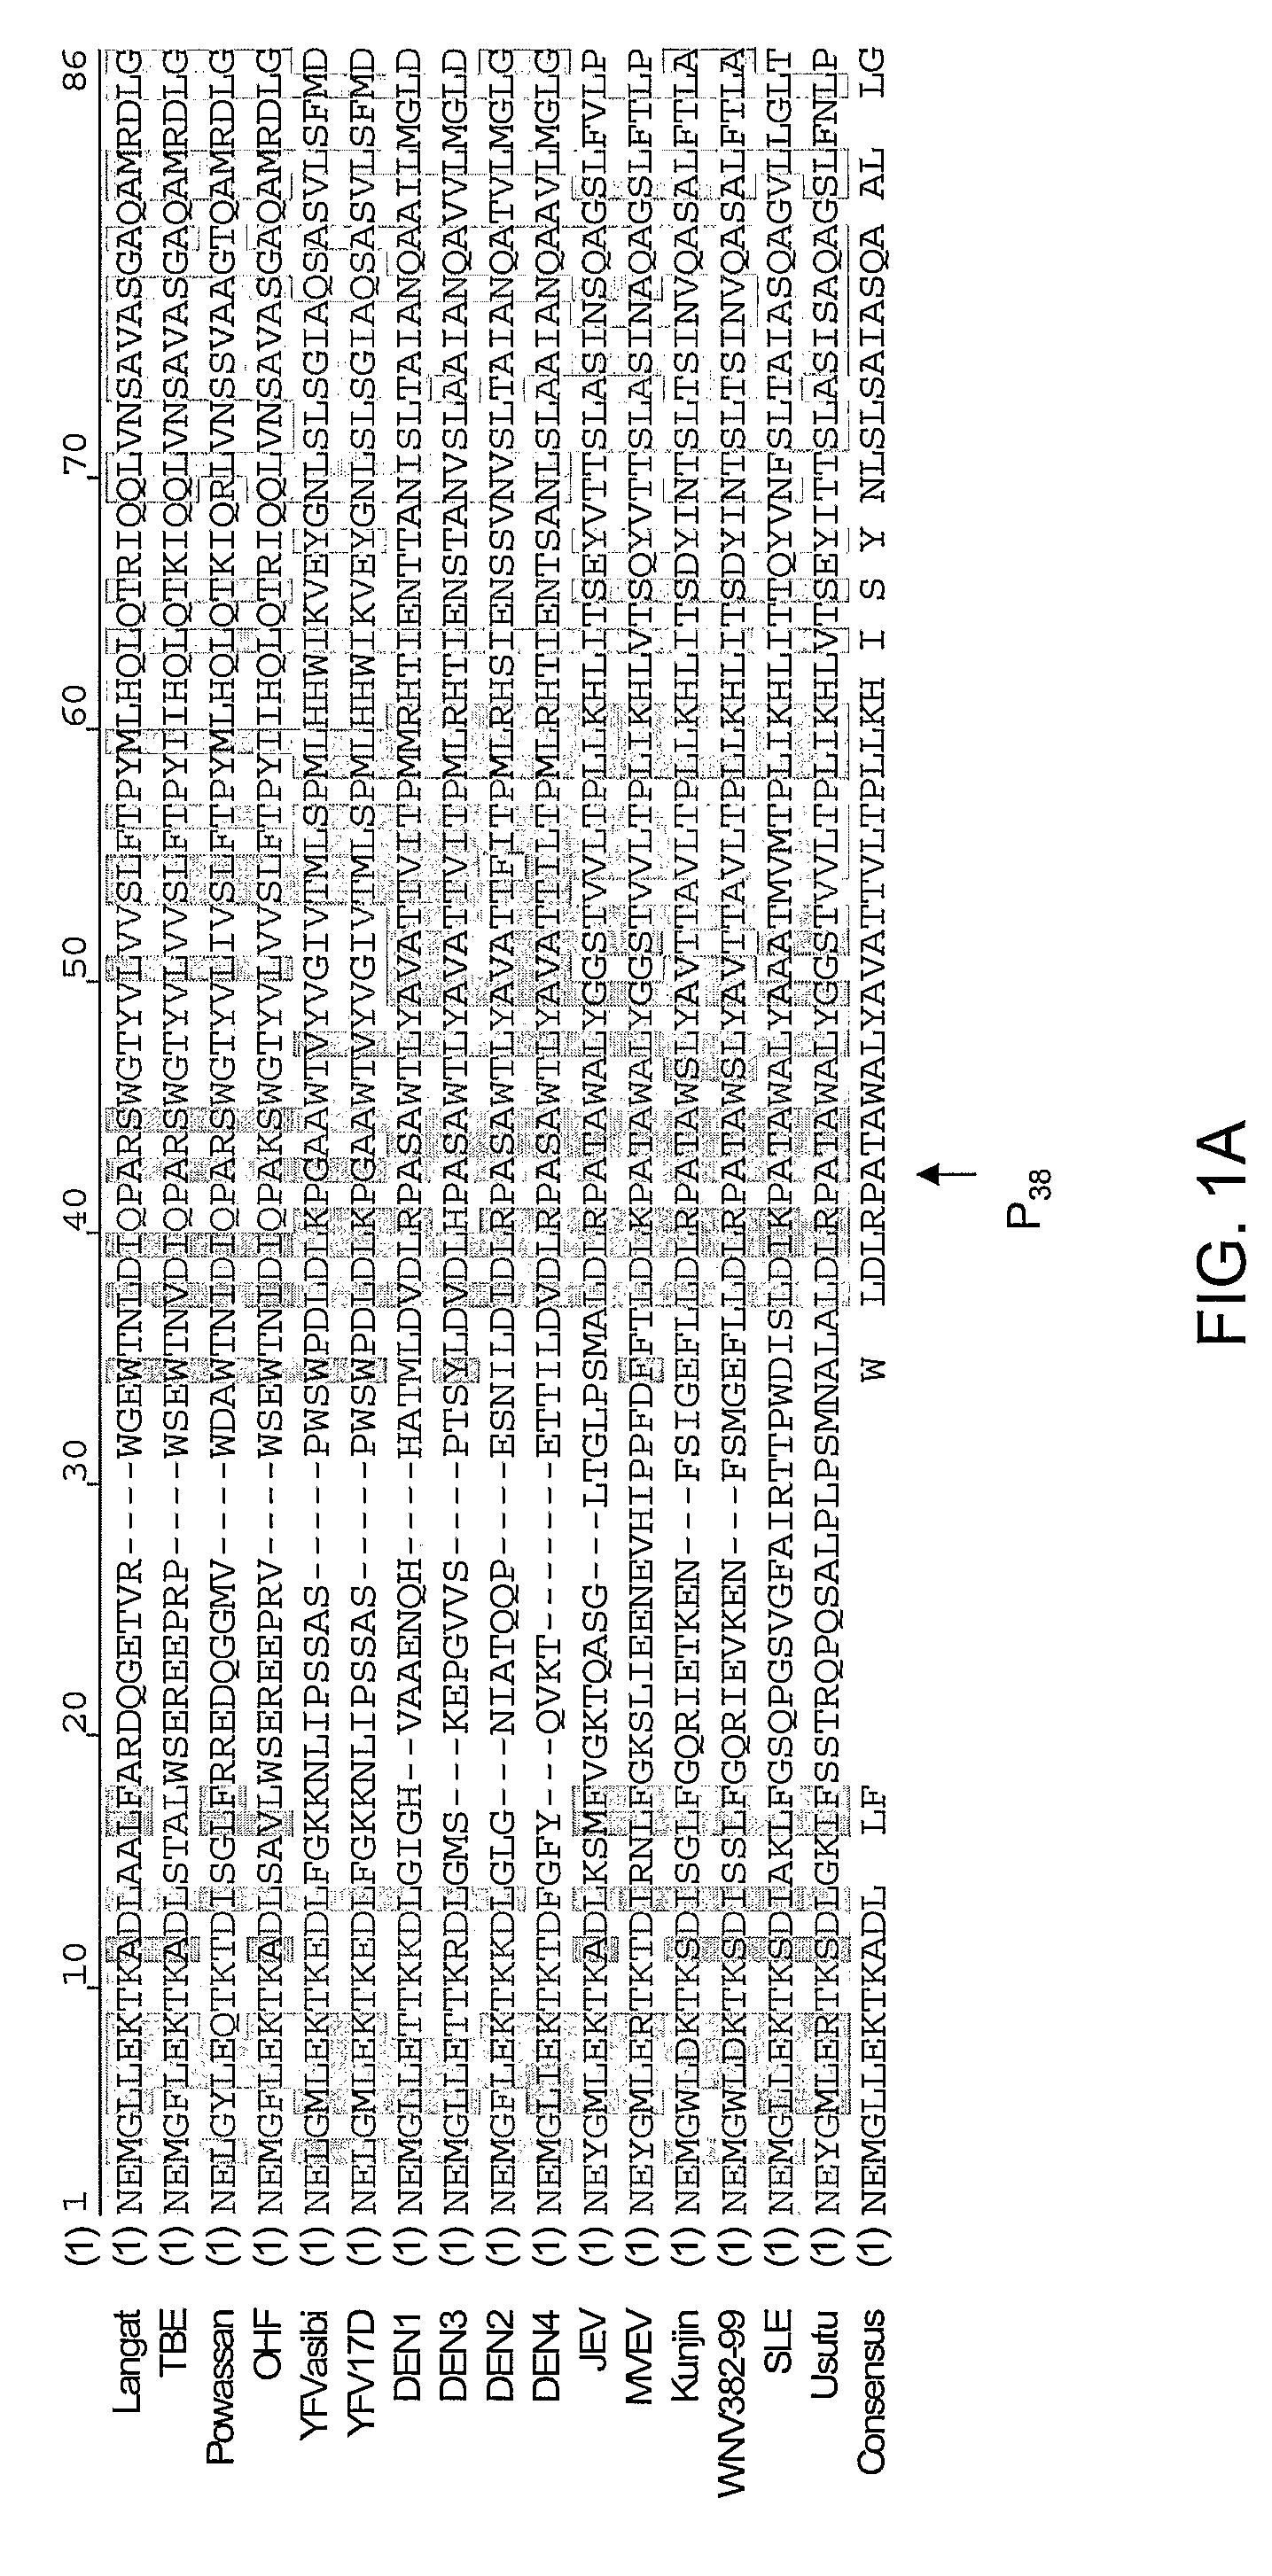 Novel attenuated virus strains and uses thereof